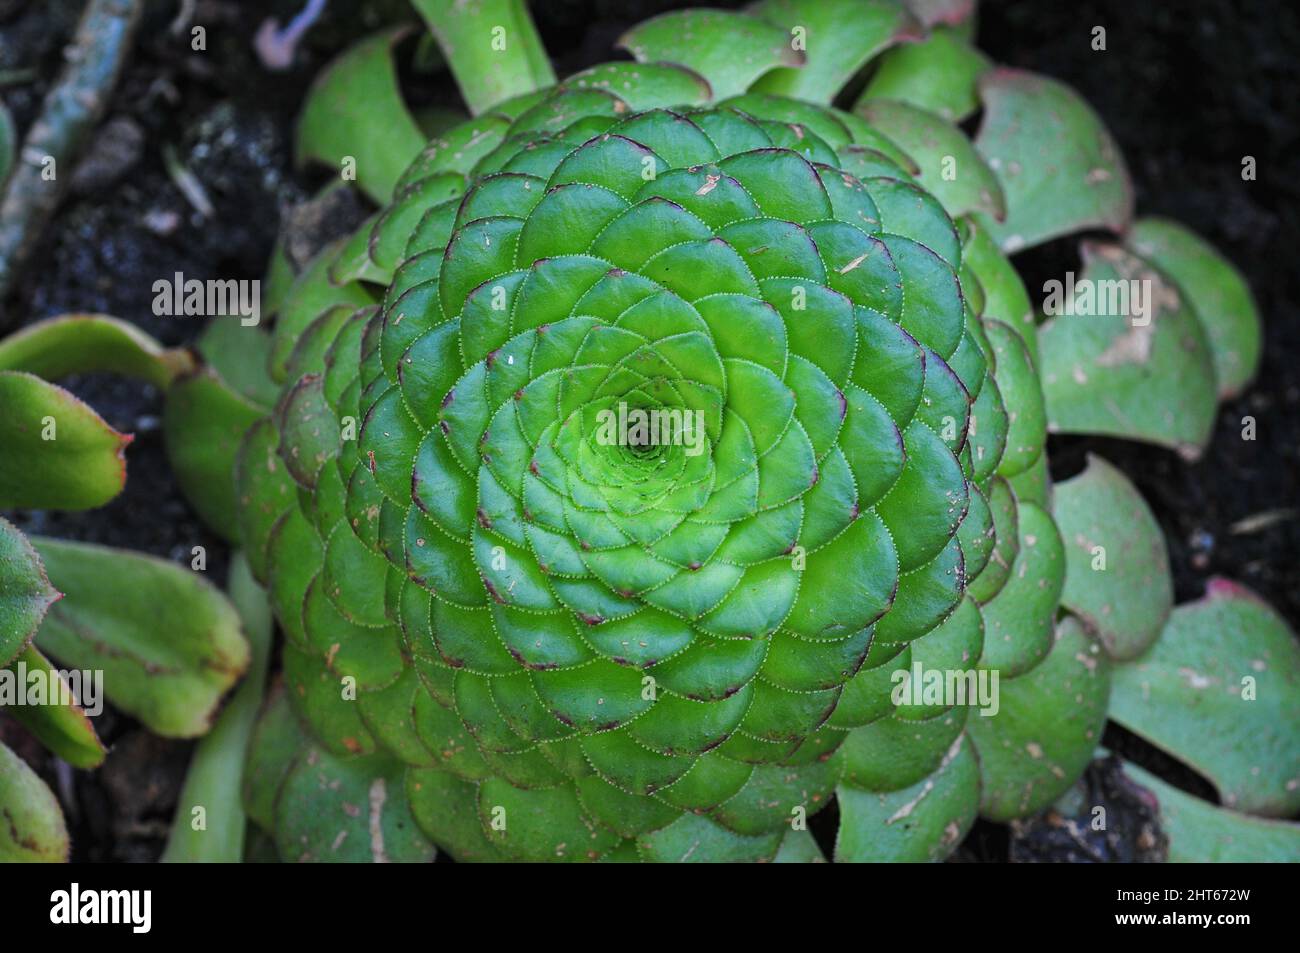 Closeup of a bright green succulent flower outdoors Stock Photo